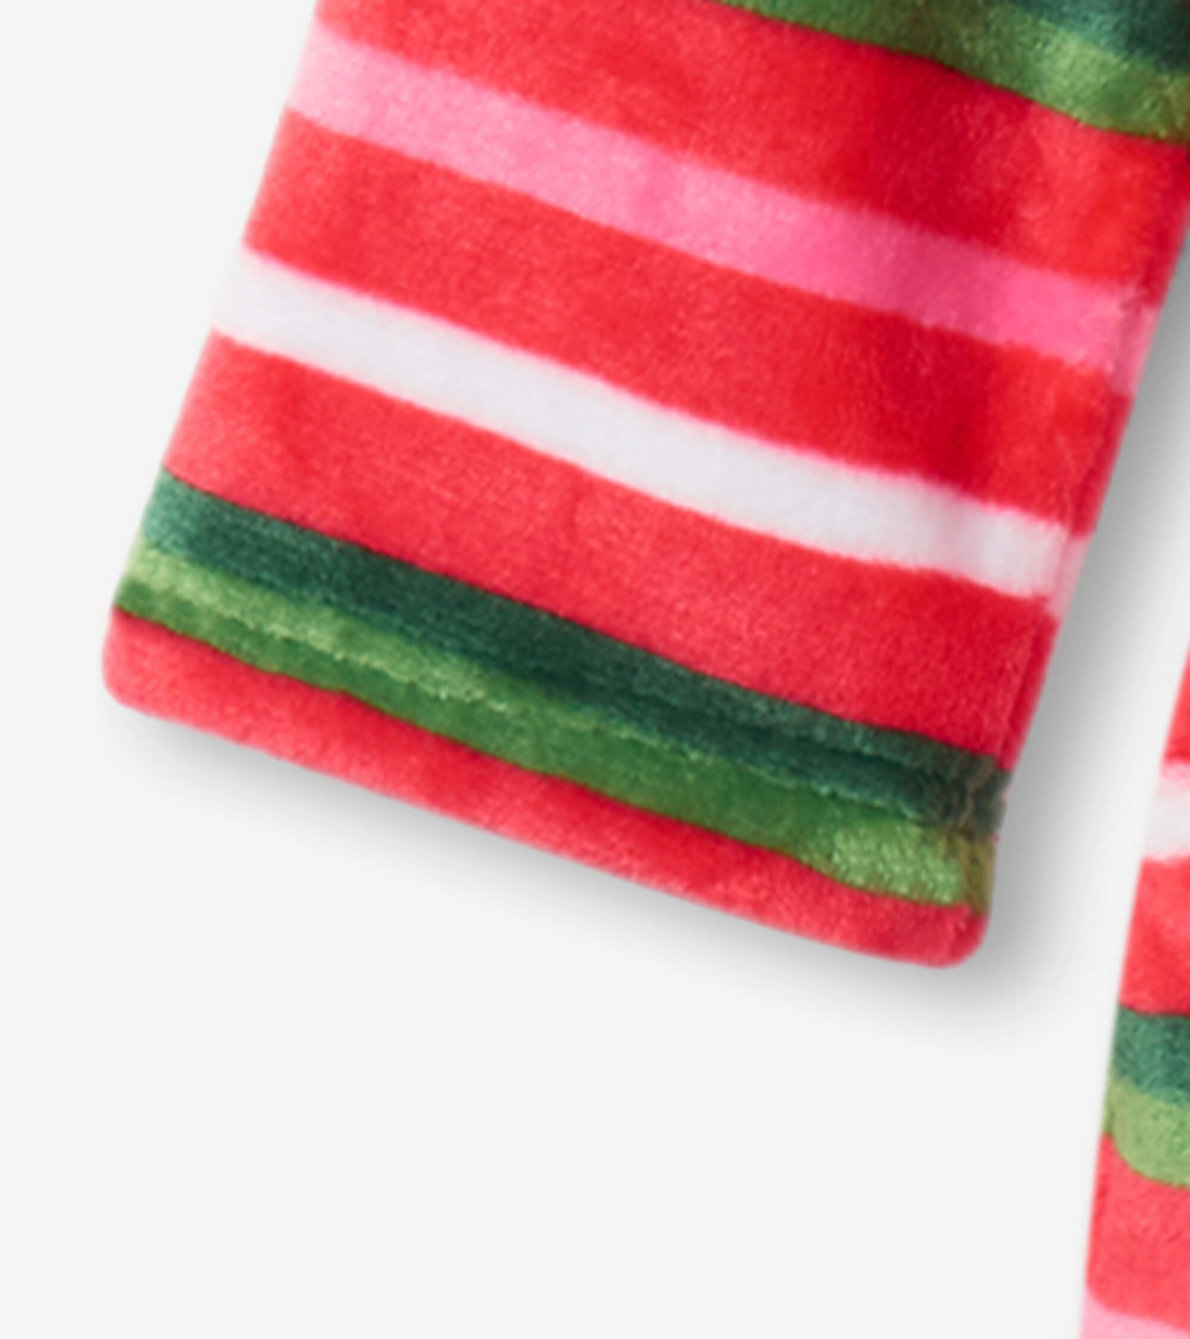 View larger image of Candy Cane Stripes Kids Fleece Robe